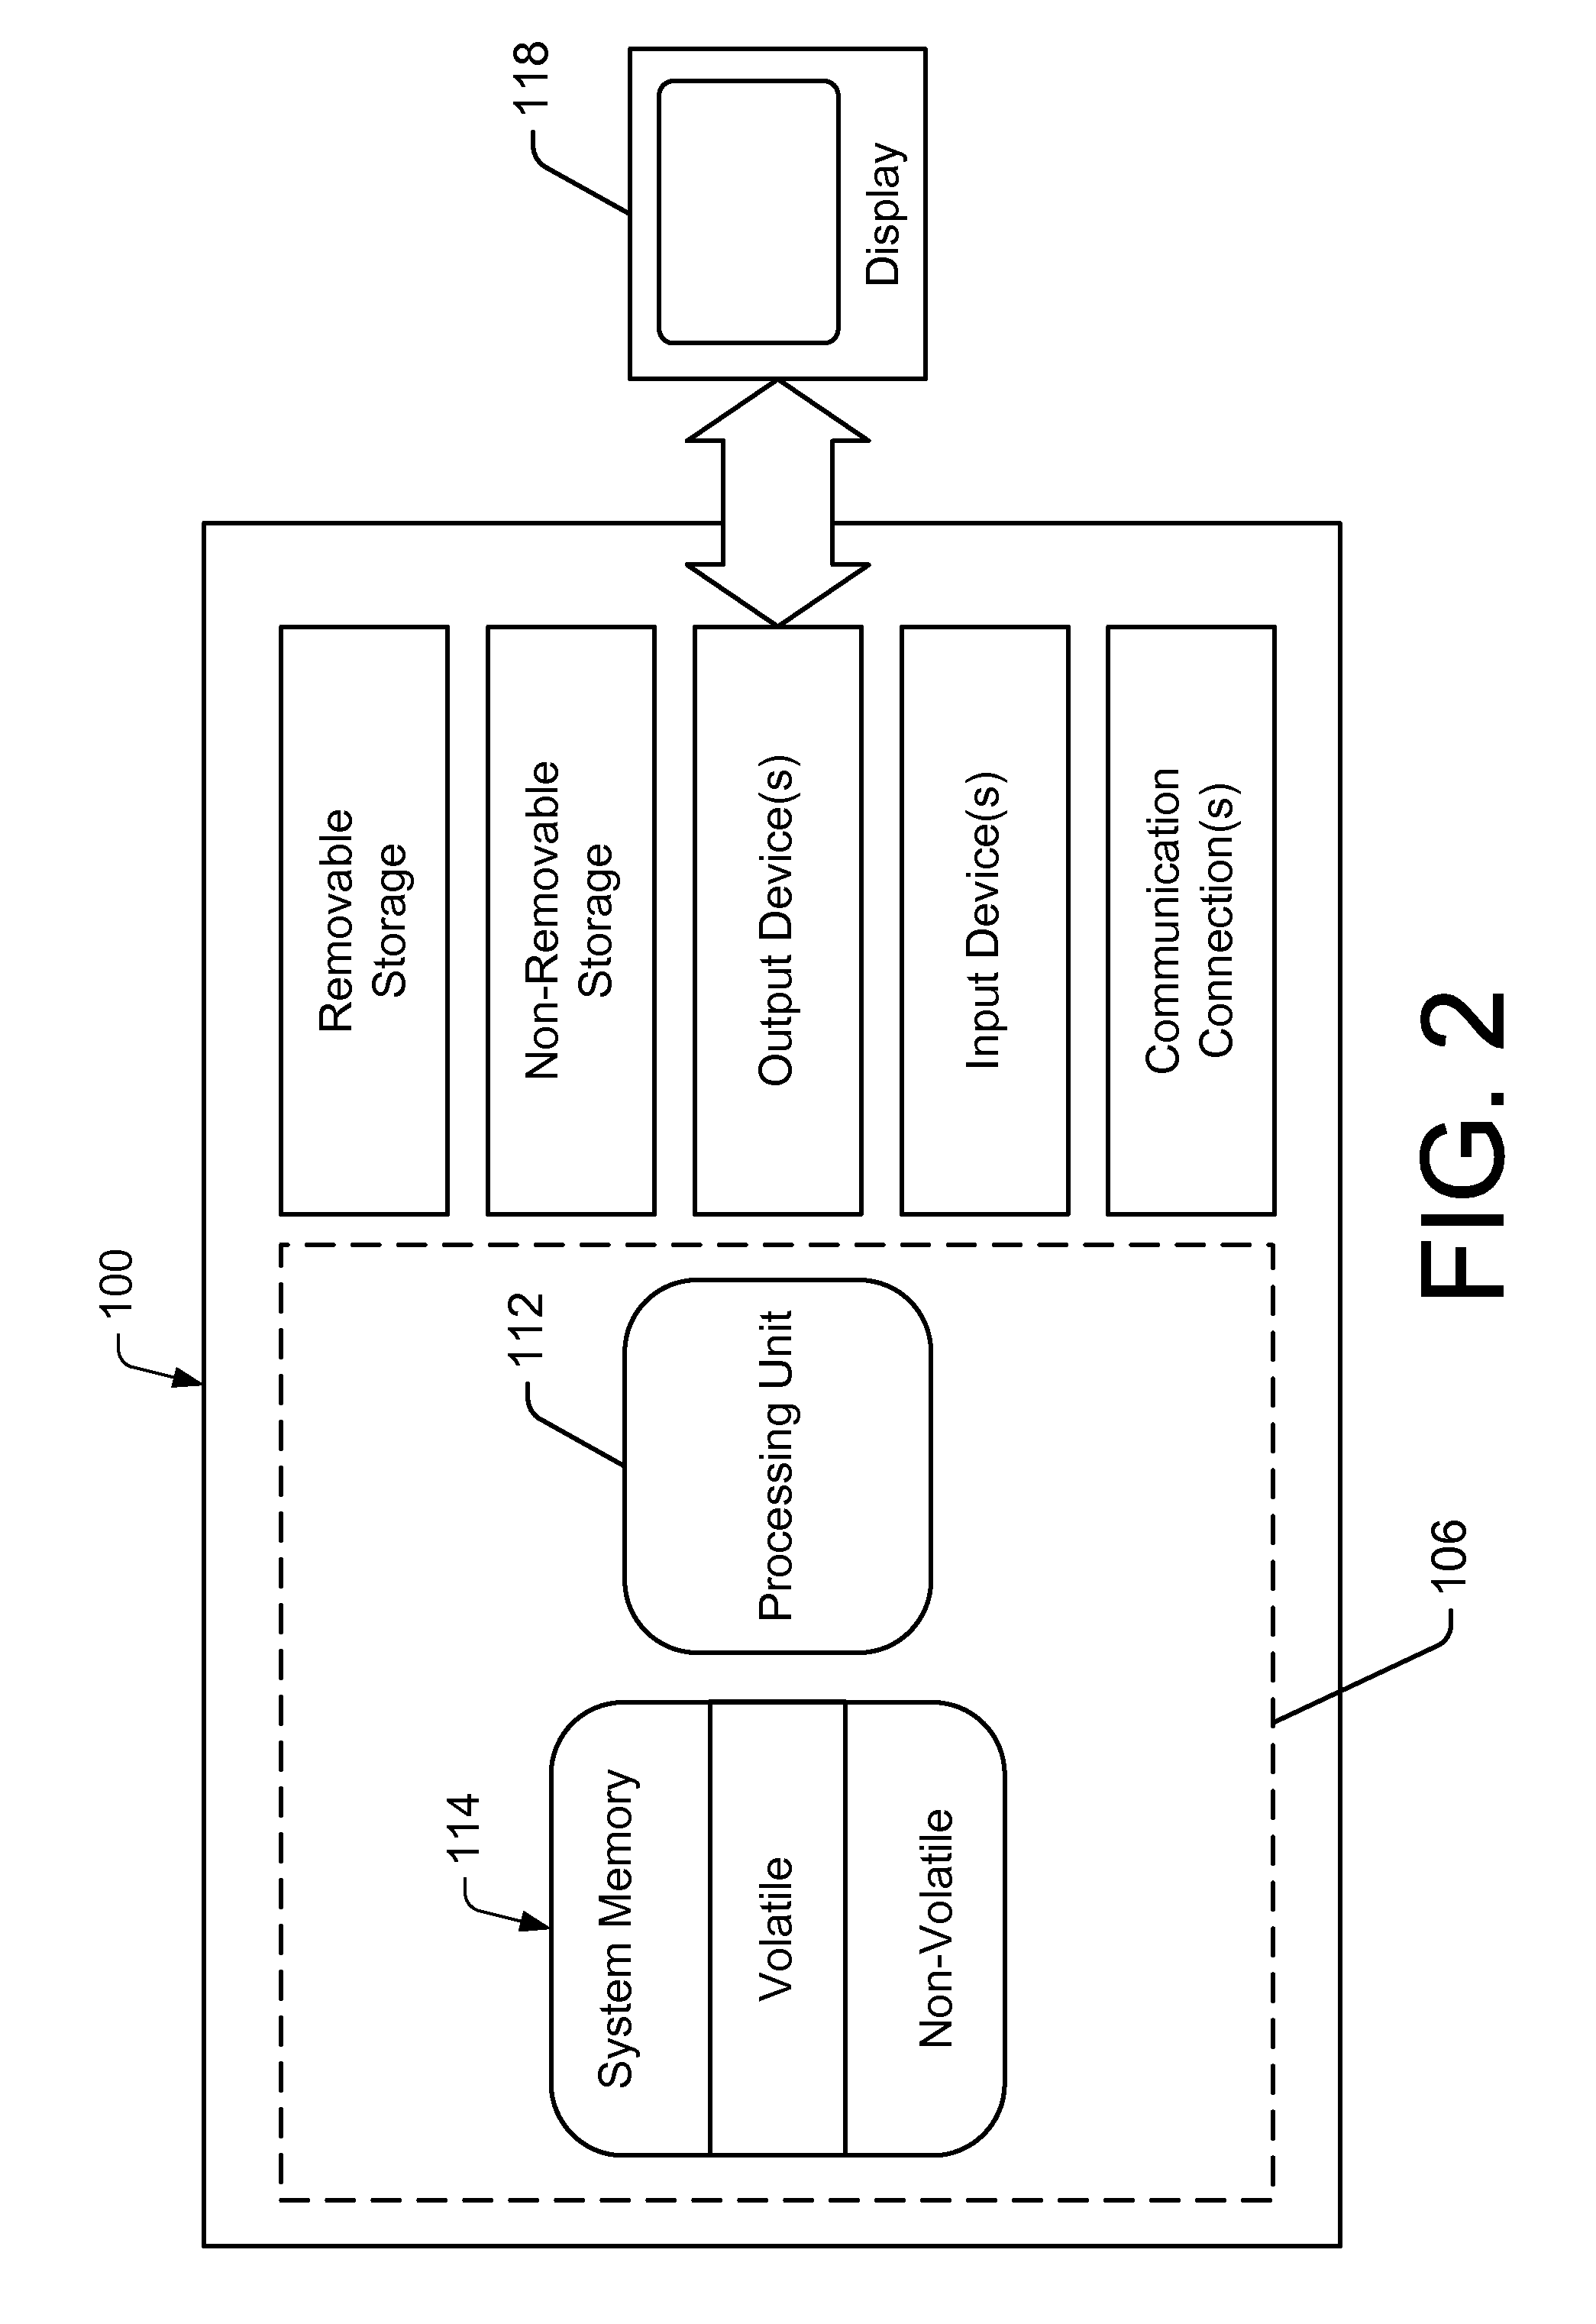 Method and system for displaying information on a user interface